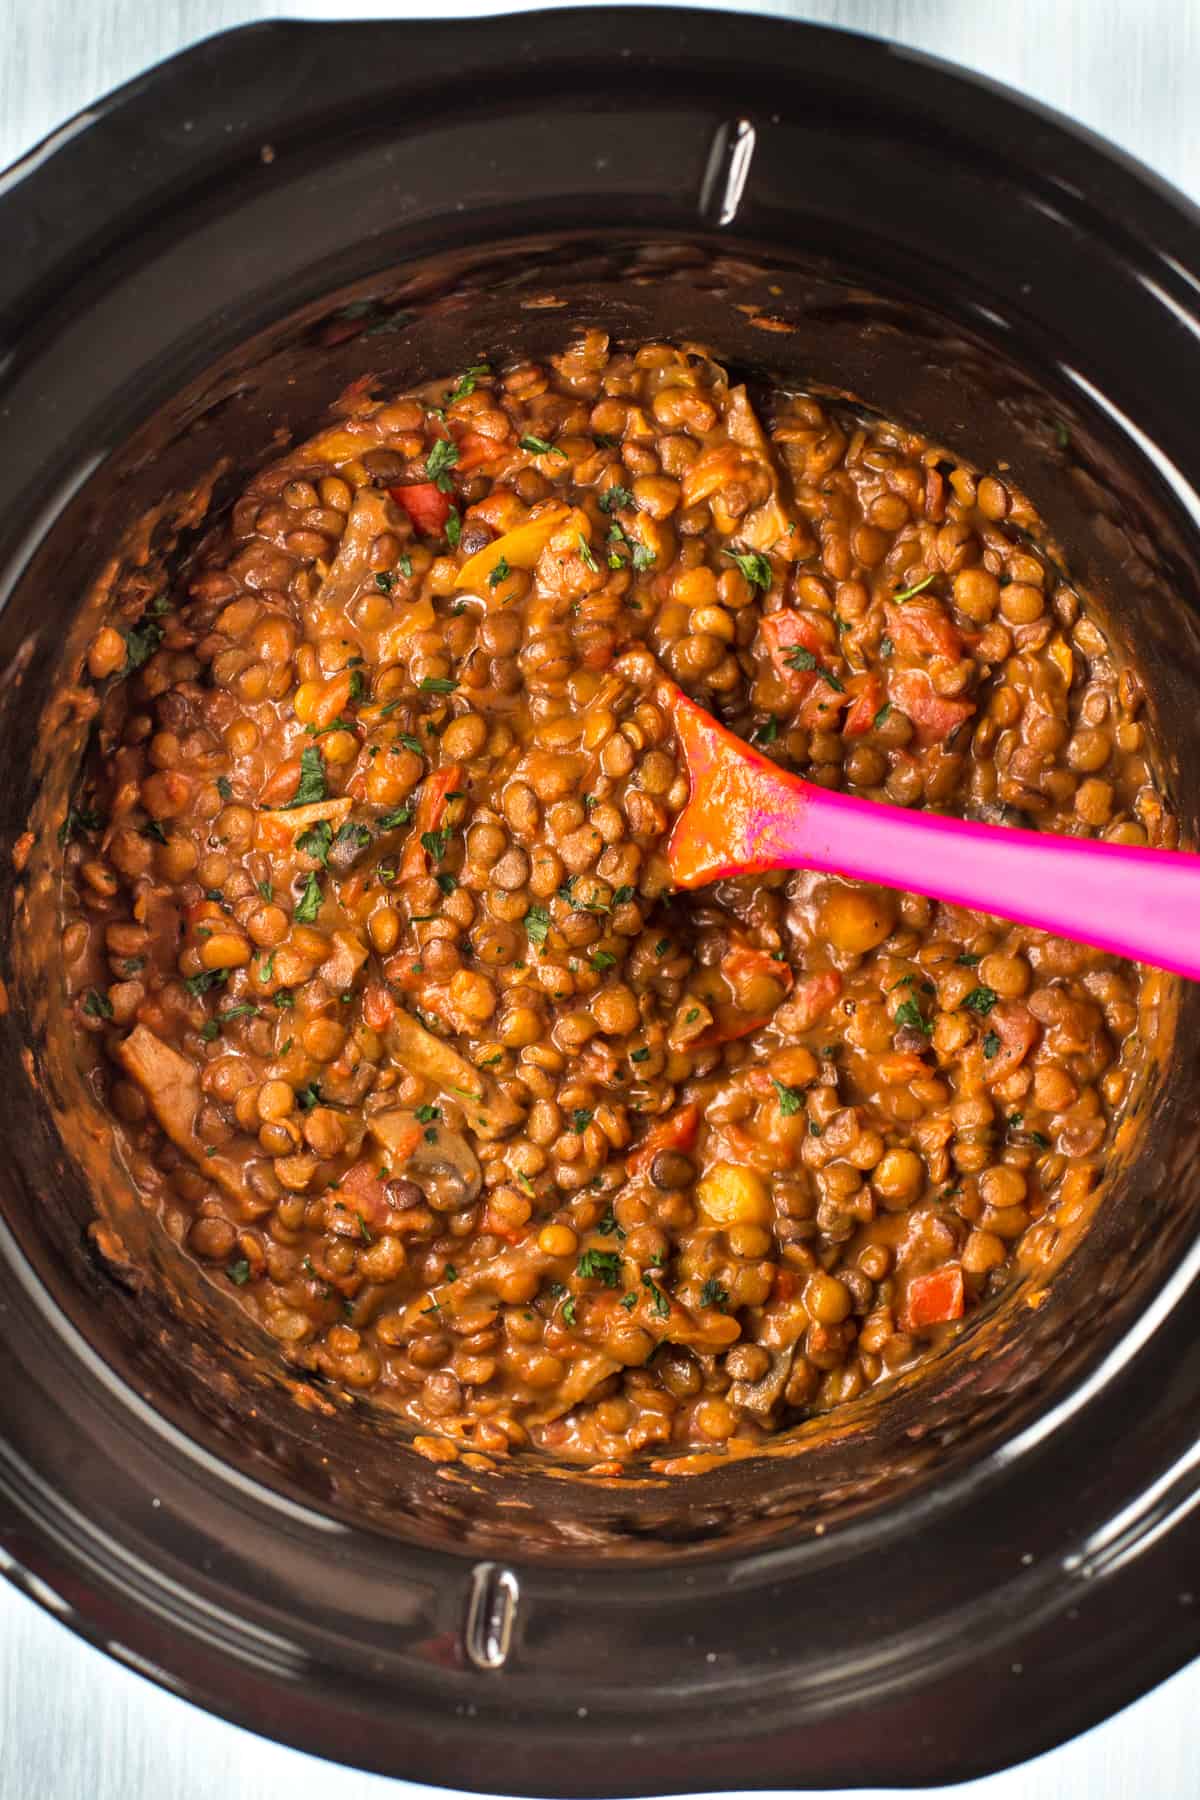 Cheesy lentils and vegetables in a slow cooker pot.